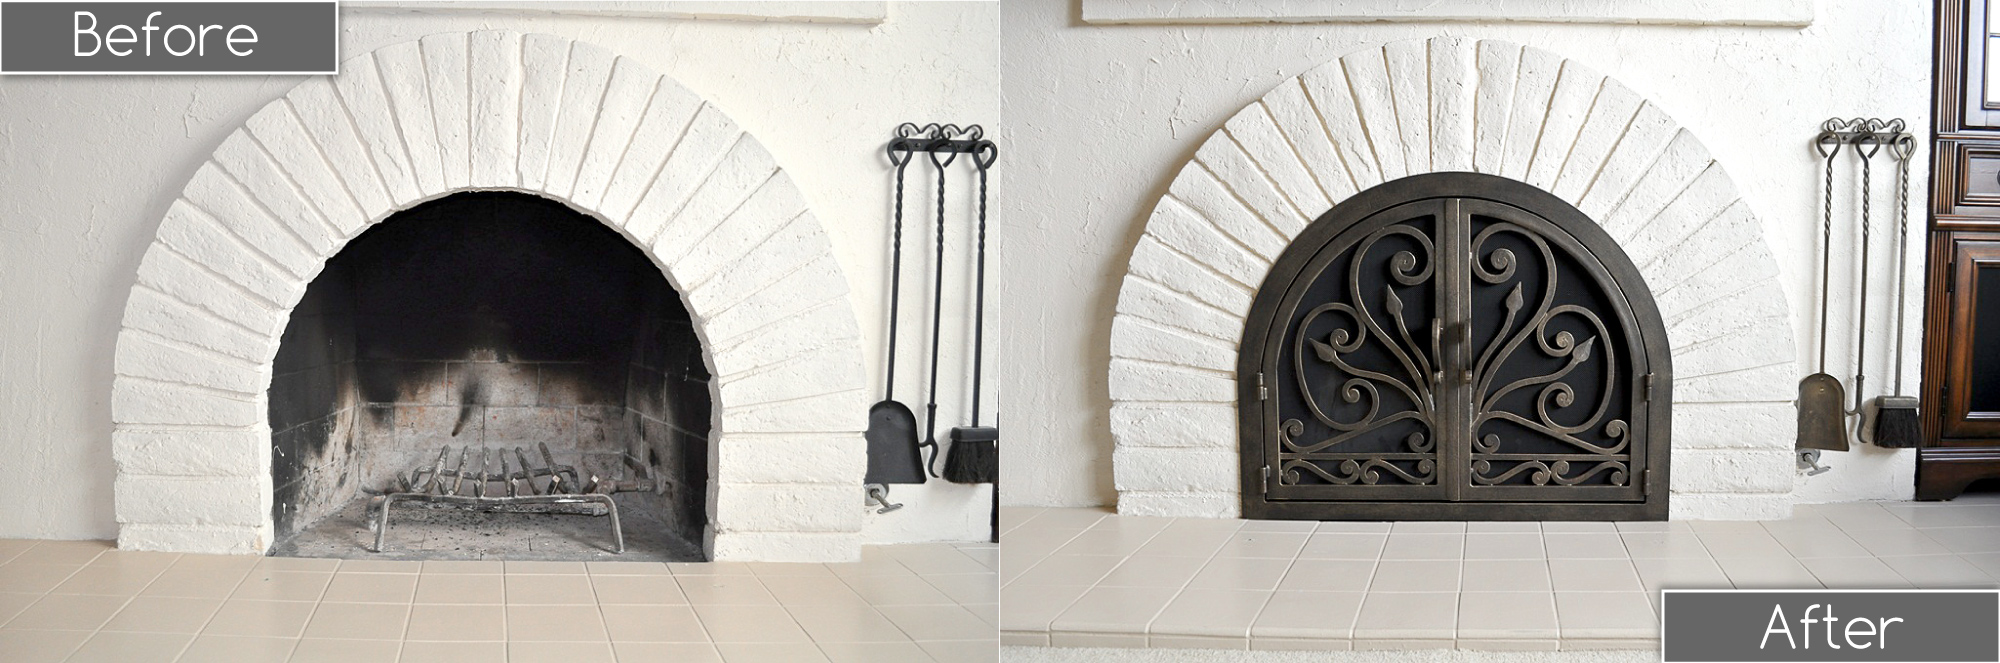 Arched Fireplace Doors Before and After